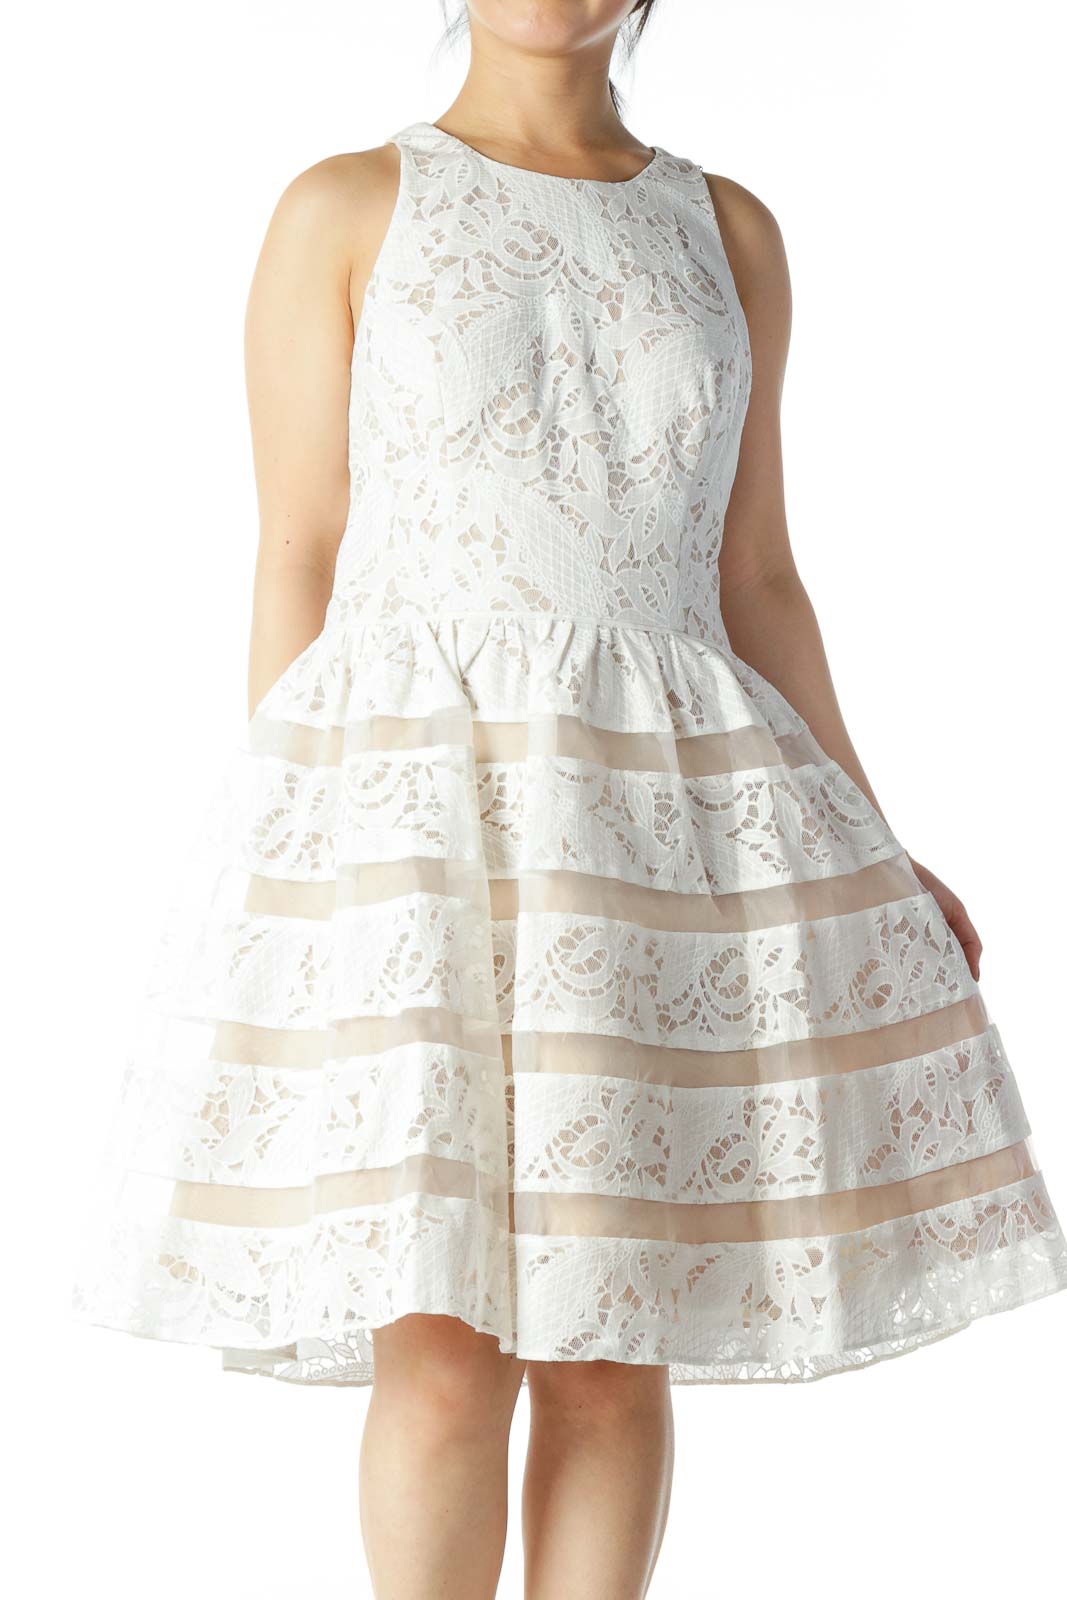 White and Nude Lace Tea Dress Front